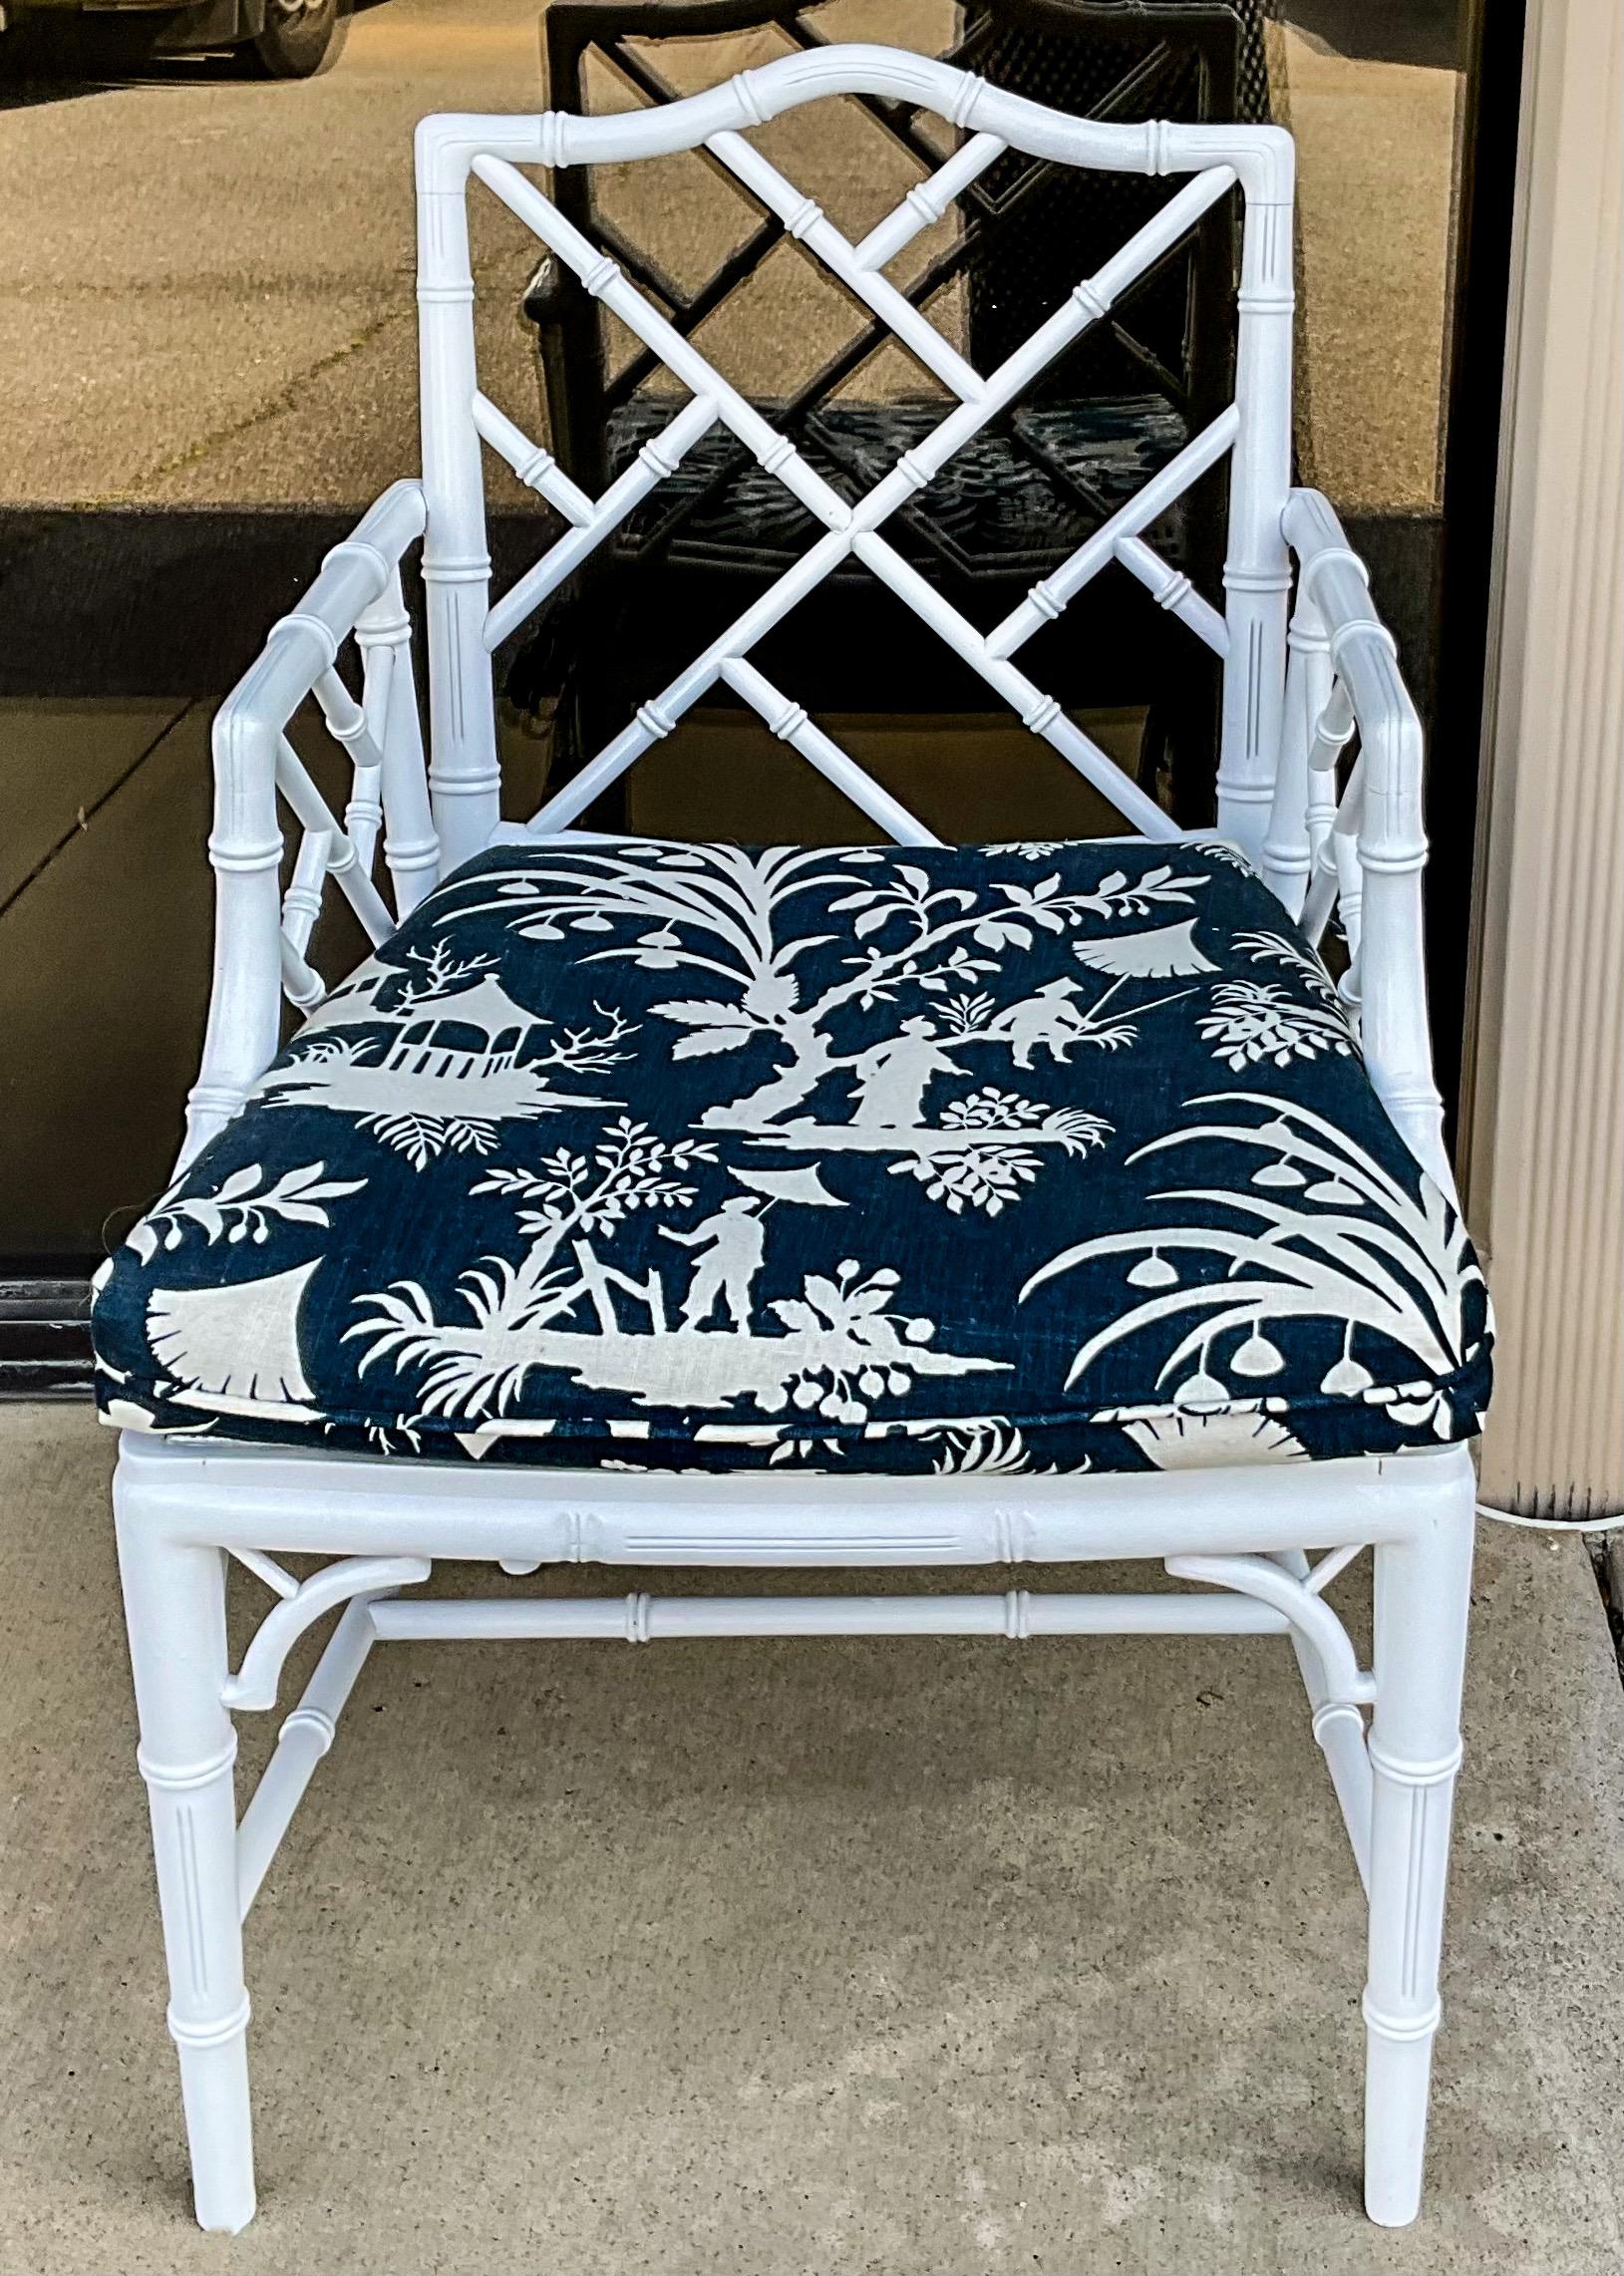 This is a 1970s white lacquer Chinese Chippendale style faux bamboo arm chair. The finish is a white lacquer. The seat is caned with a navy and white cotton linen blend chinoiserie. The fabric is the “South Seas” pattern by Thaibaut. It is unmarked